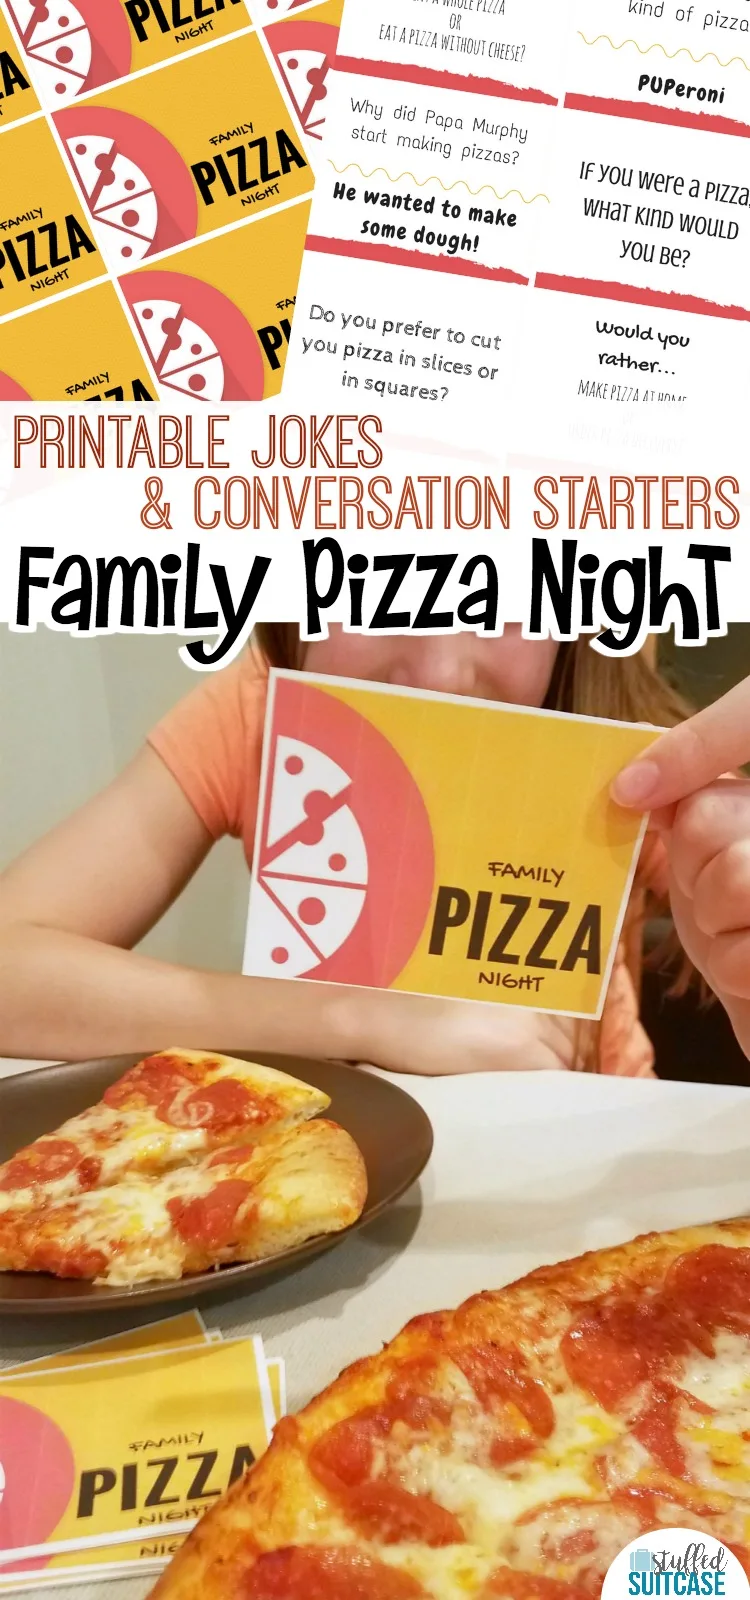 Pizza is popular for busy family nights, add my free printable conversation starters and jokes to make your pizza night a family fun night!